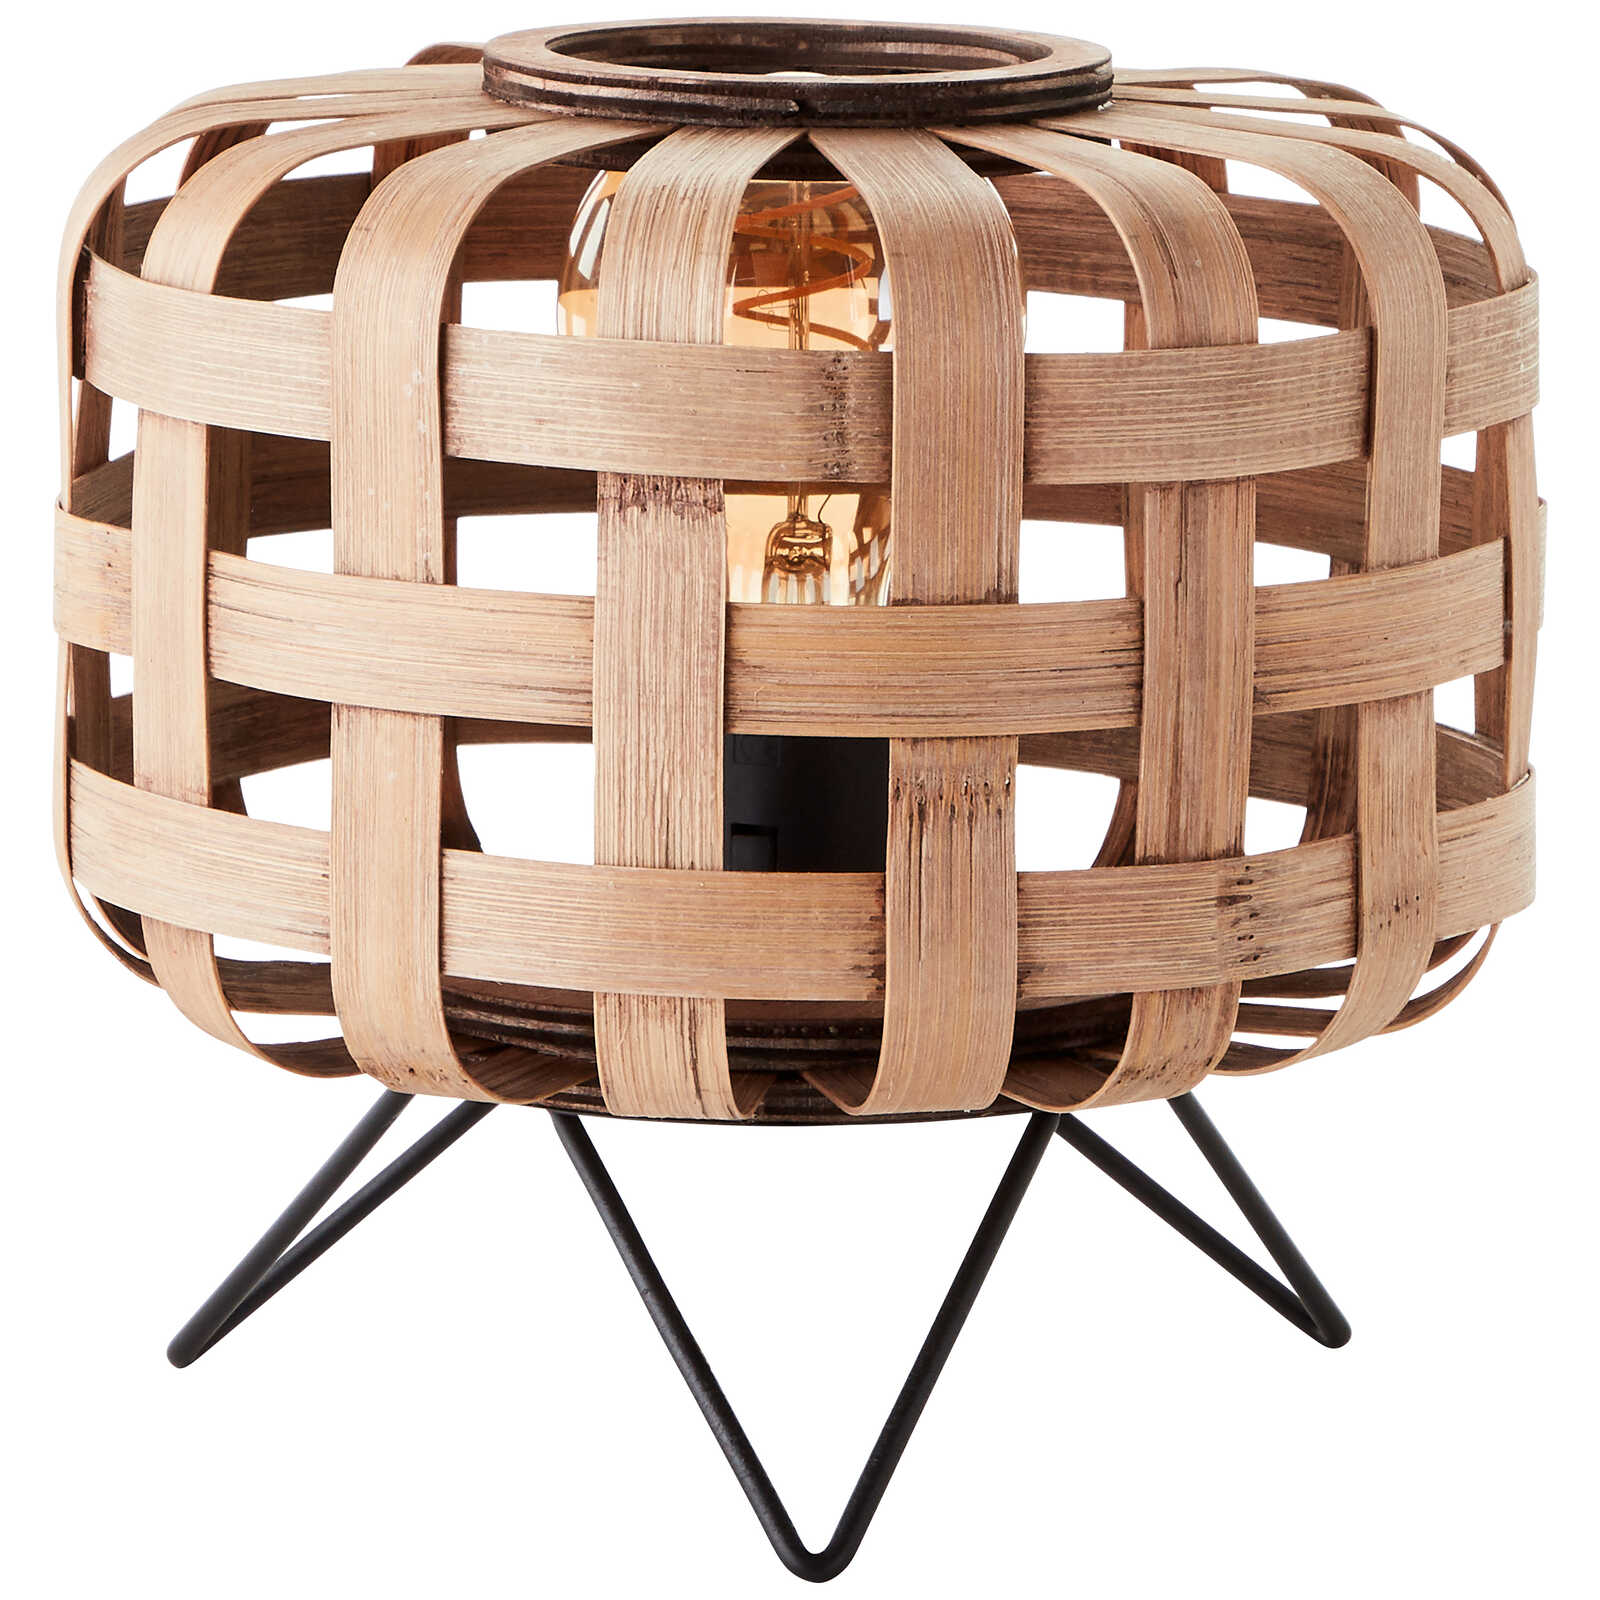             Bamboo table lamp - Wilhelm 1 - Brown
        